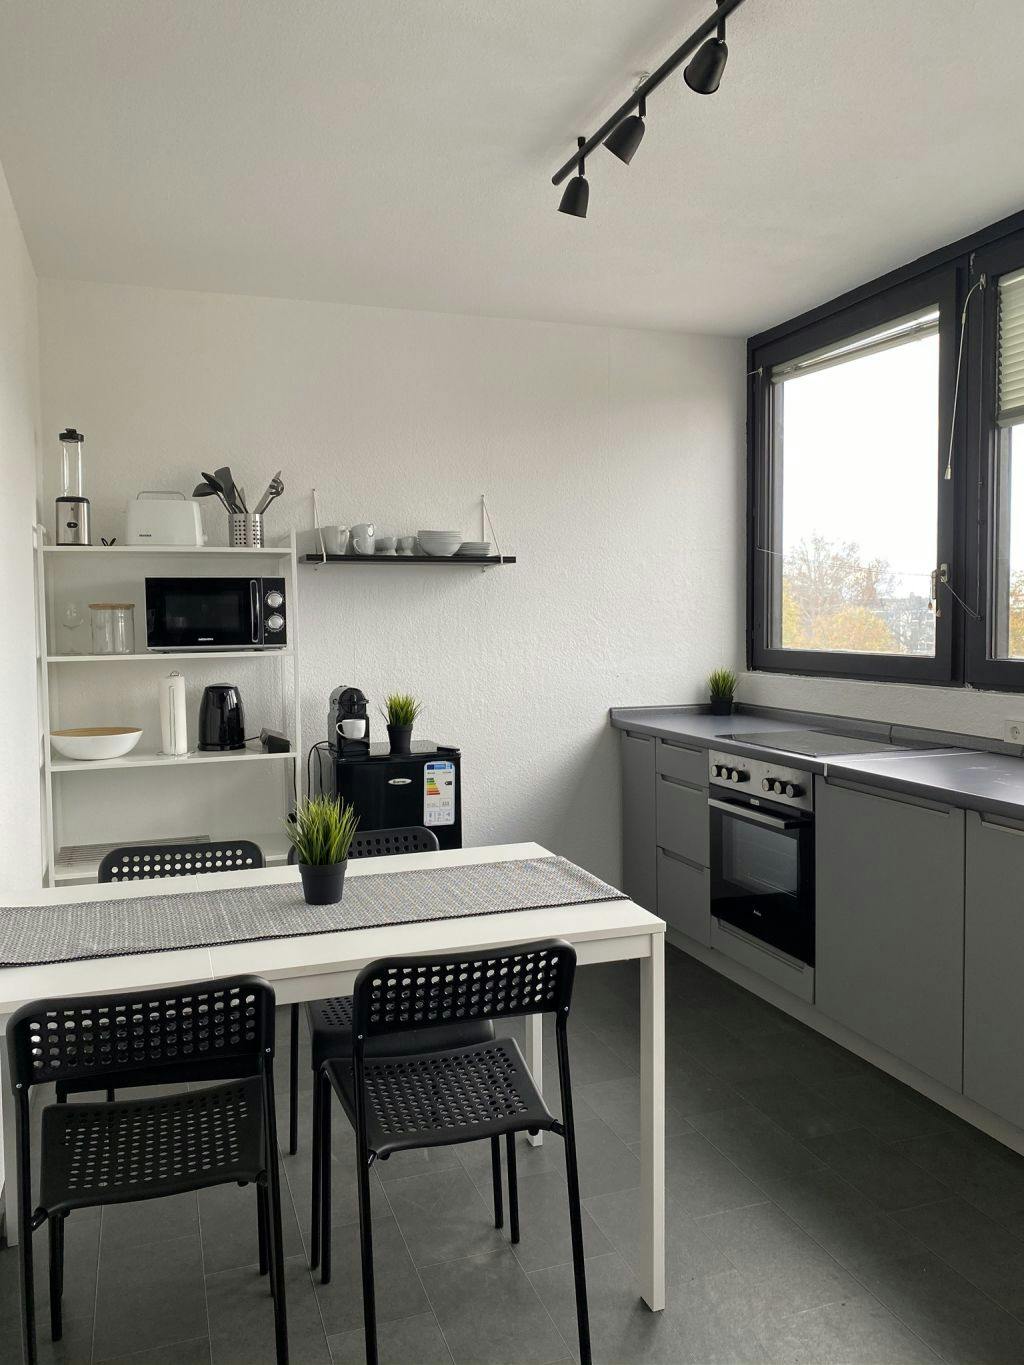 Fashionable apartment in a quiet neighborhood (Karlsruhe)